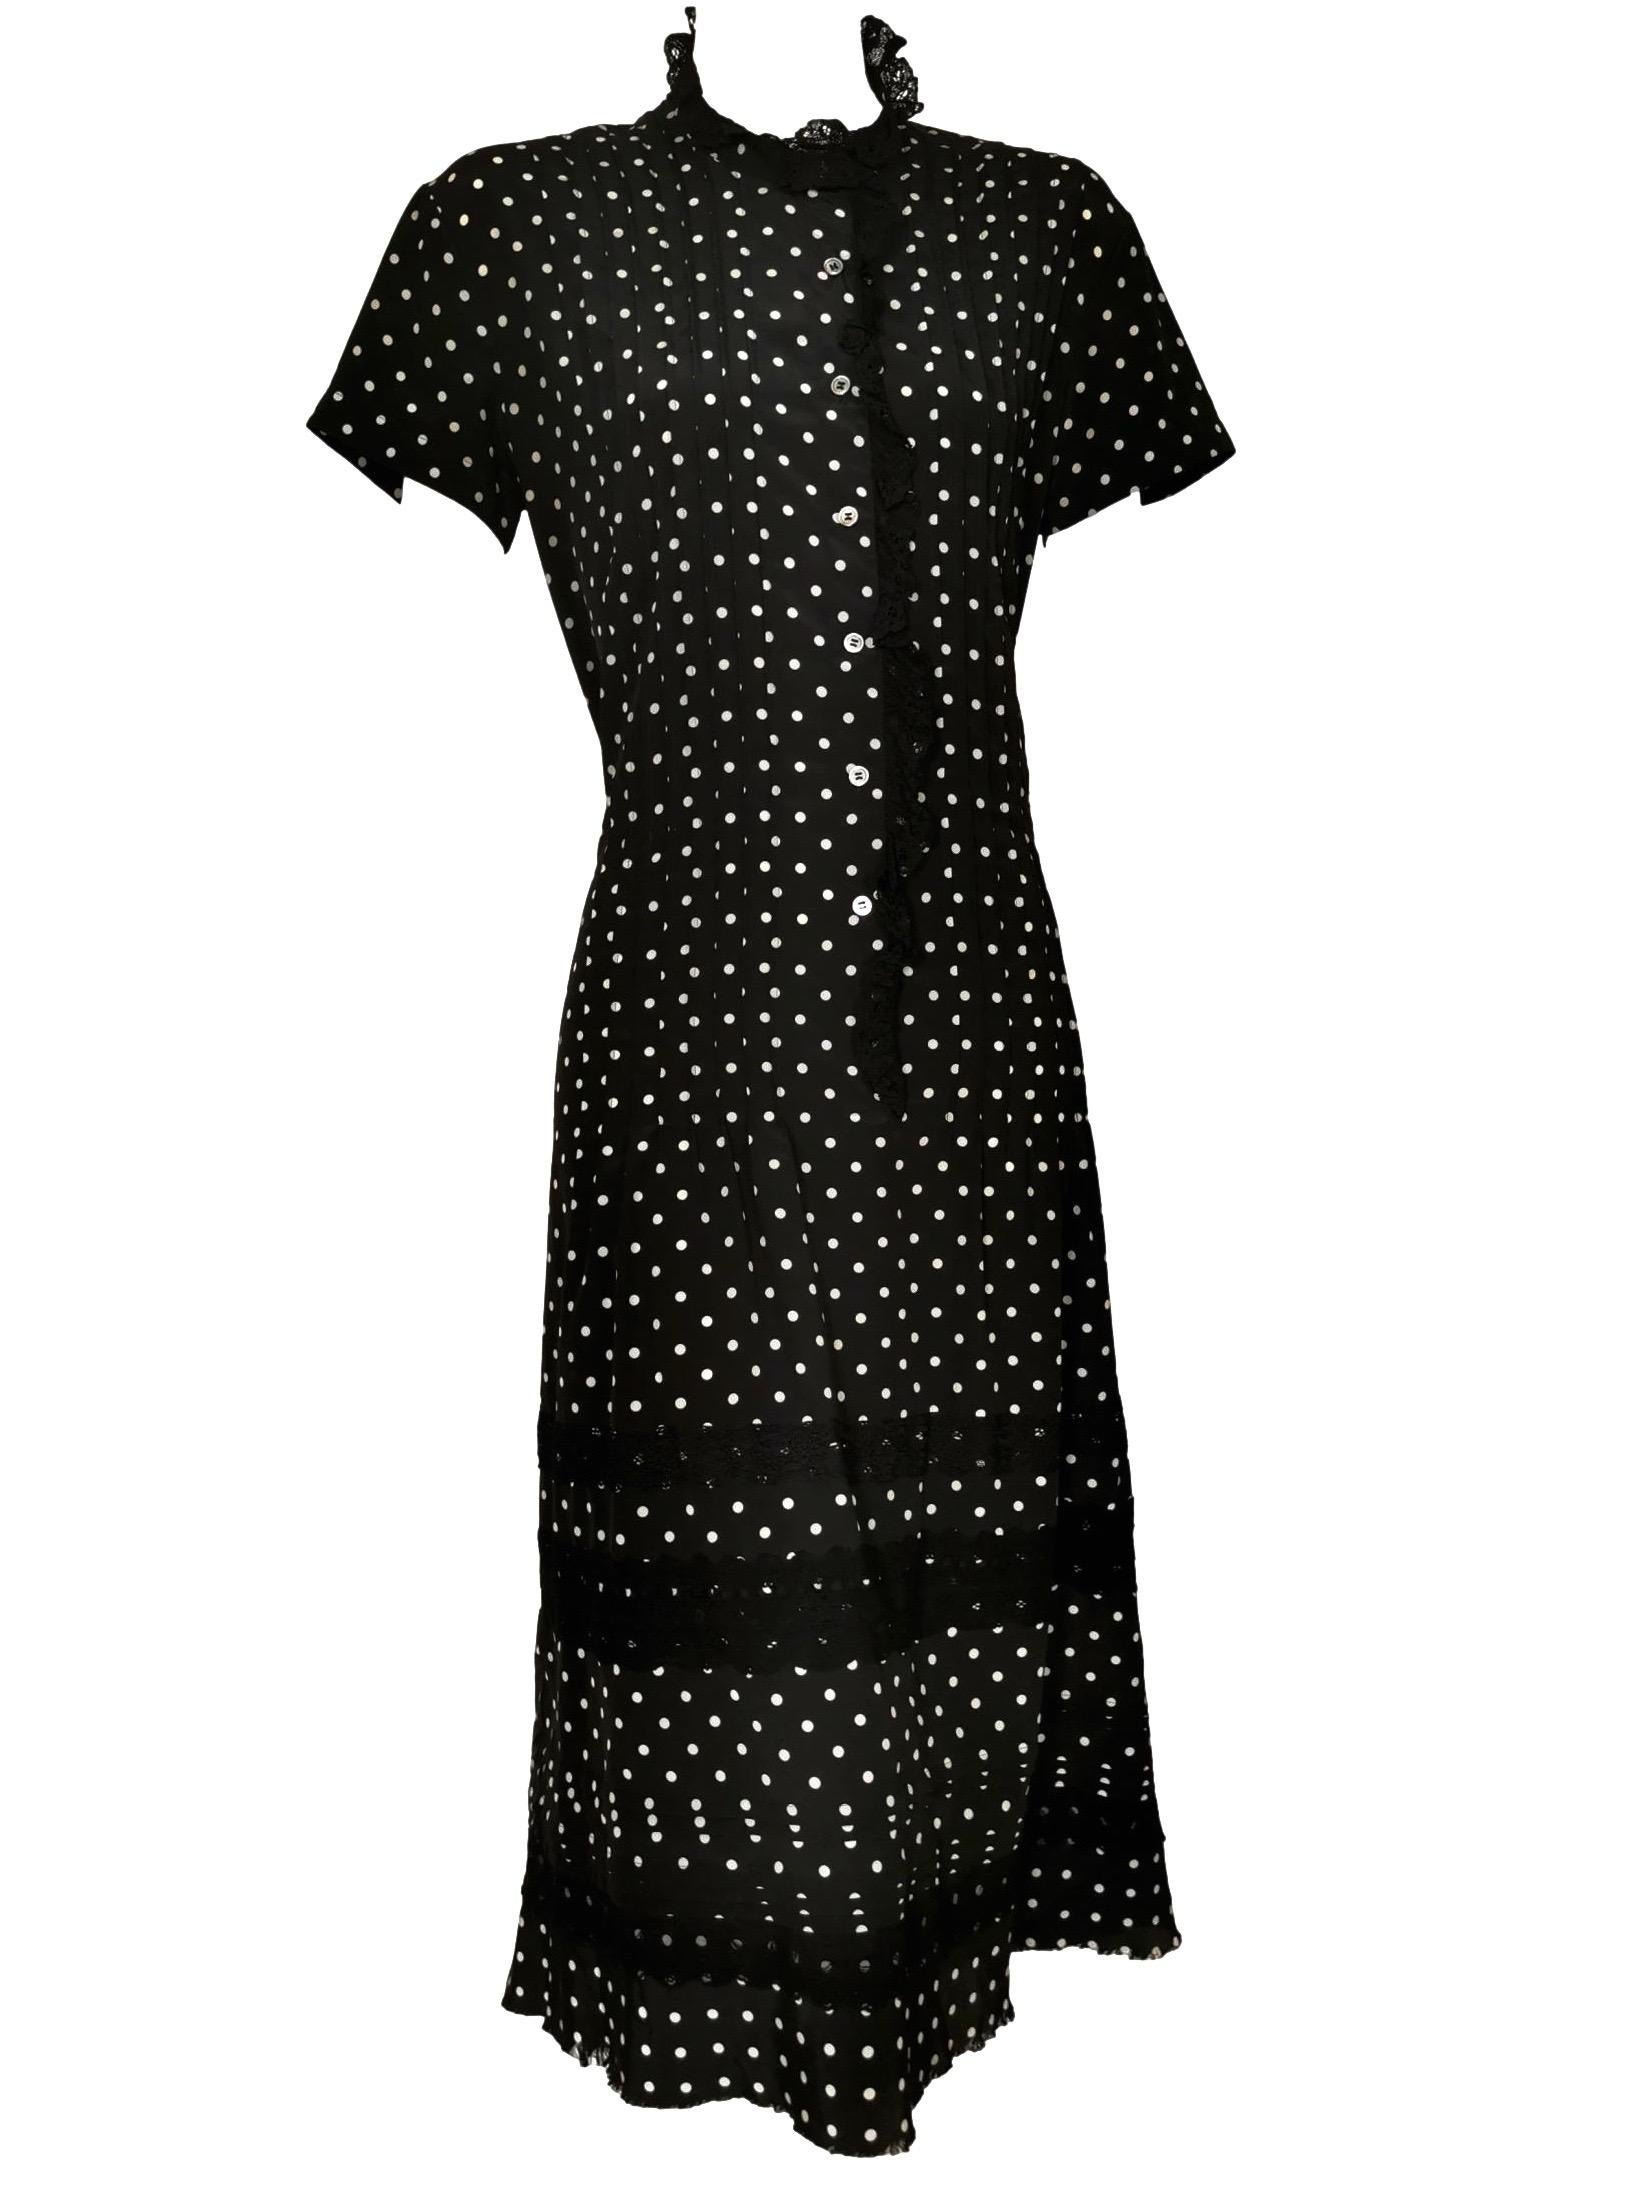 Junya Watanabe Comme des Garcons AD 2007
Twisted Polka Dot Cardigan Dress
Labelled Size S
Look Number 10 on Runway